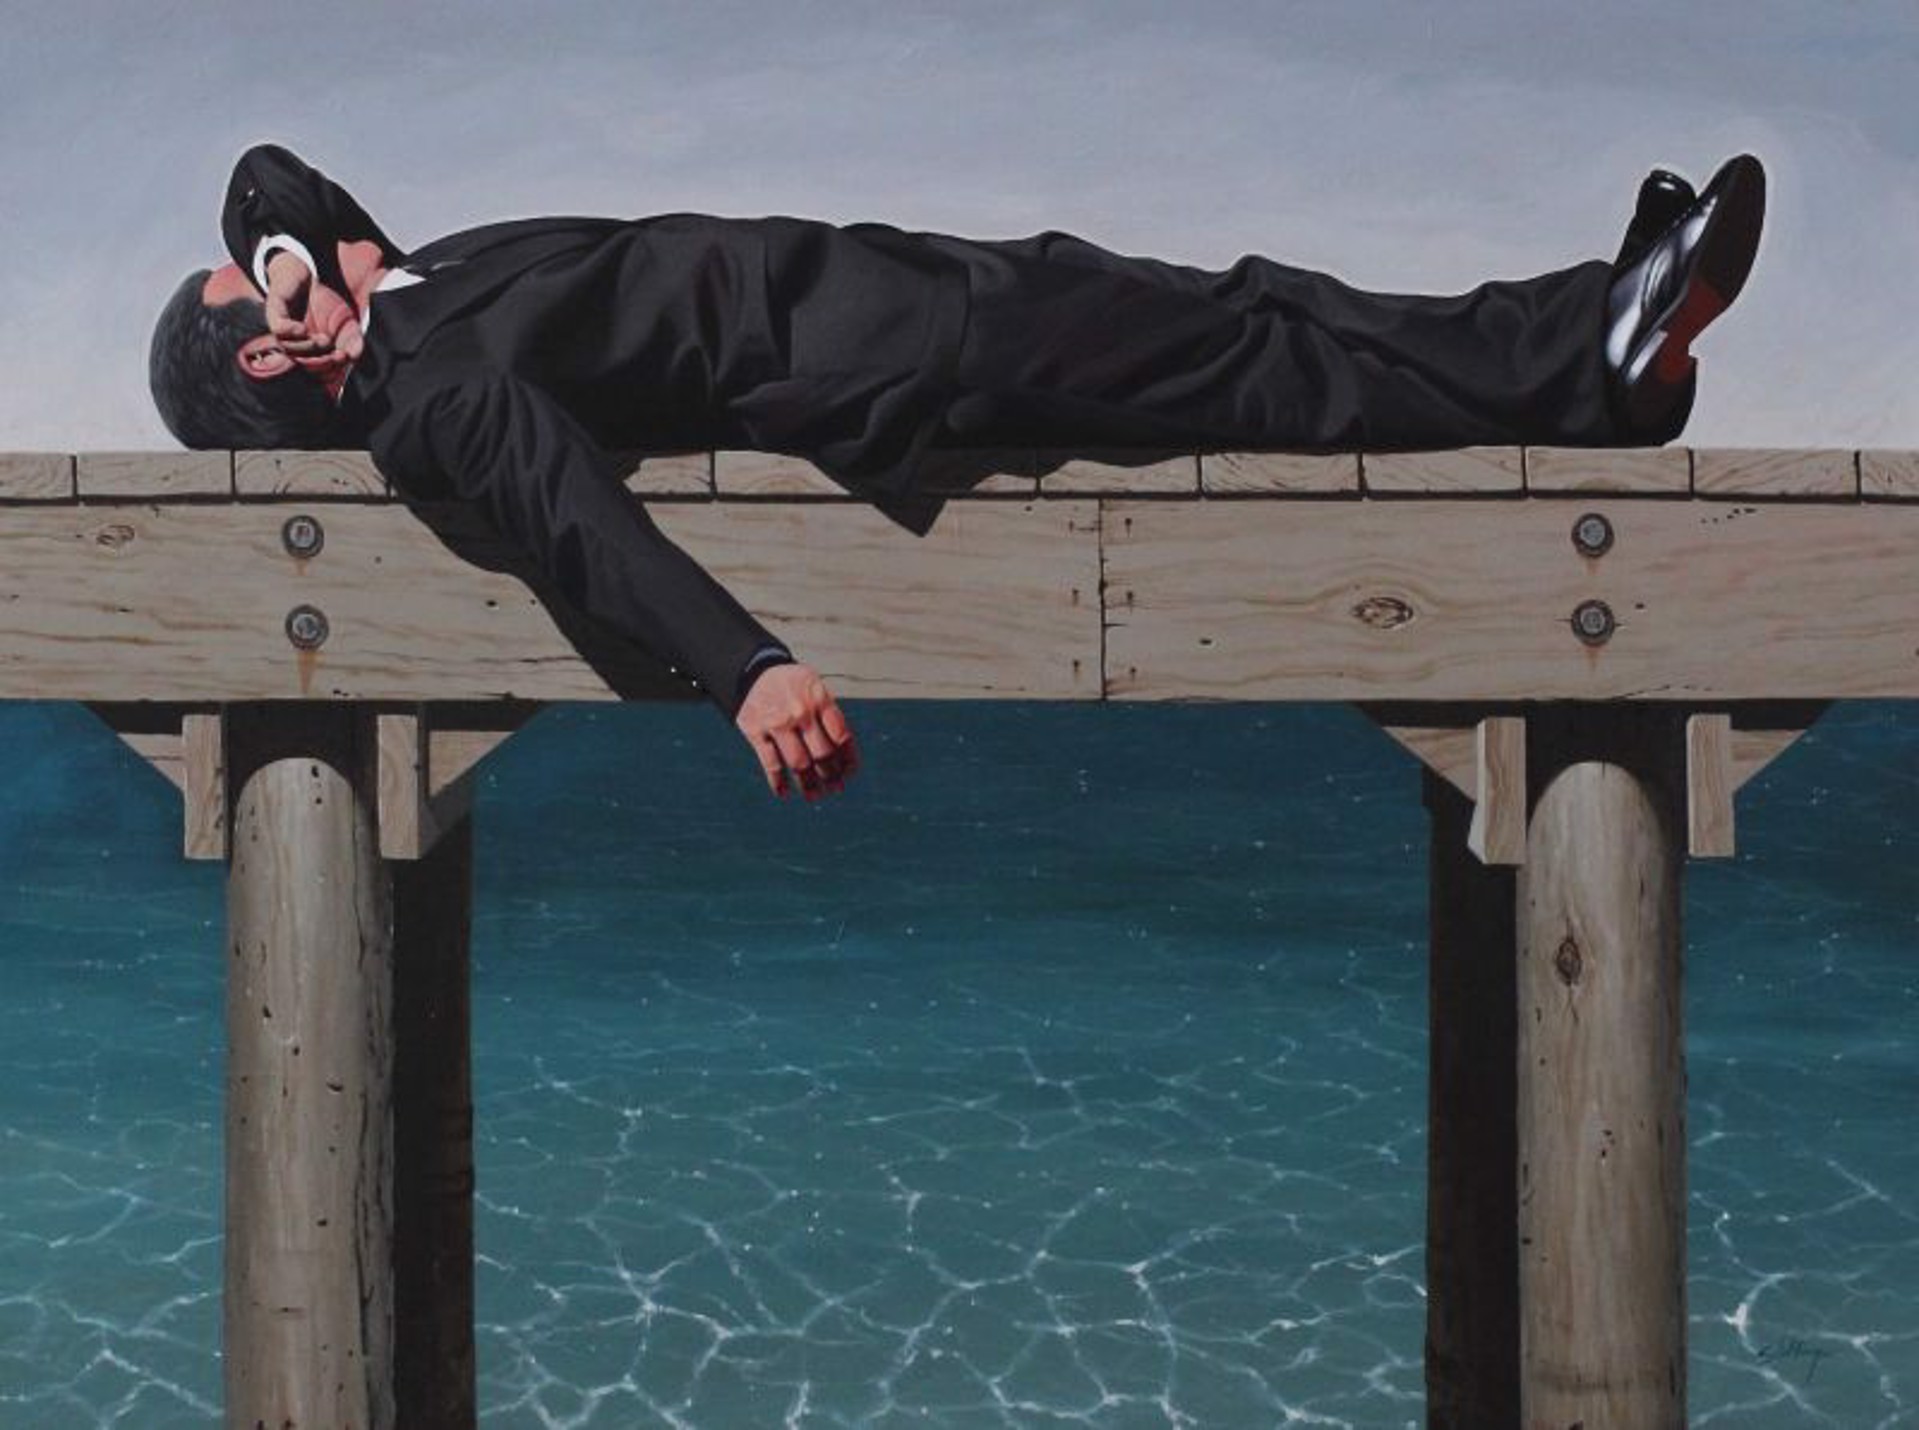 Reclining Man on Pier by Kendall Stallings